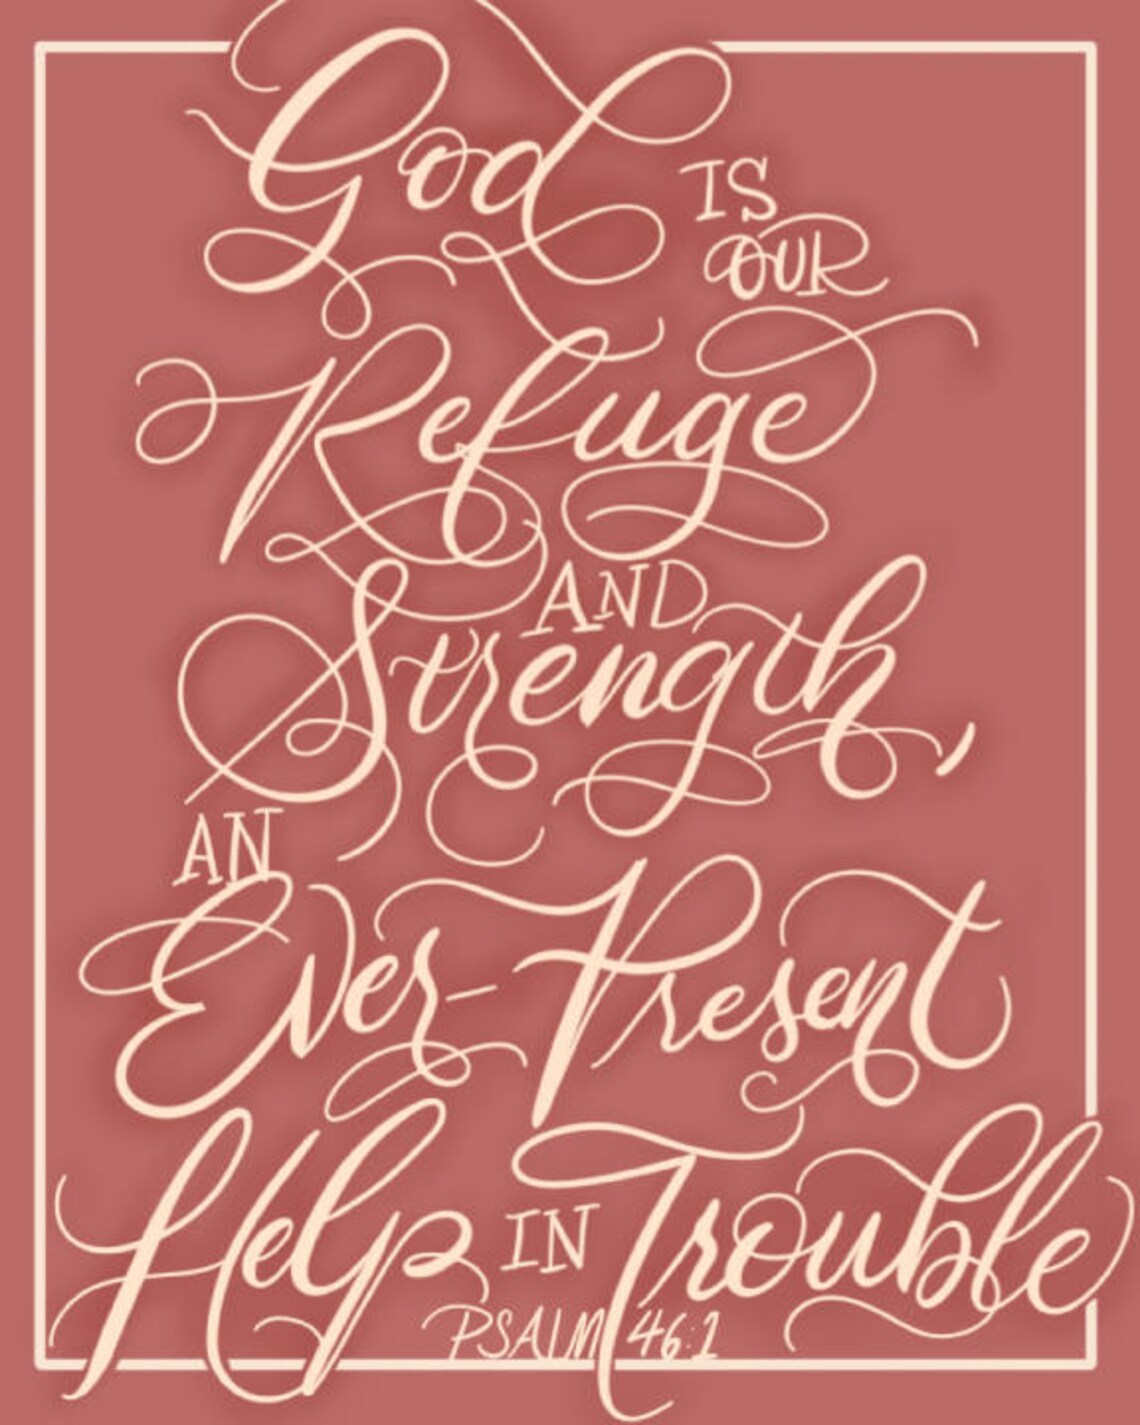 psalm-46-1-bible-verse-print-for-digital-download-8x10-etsy